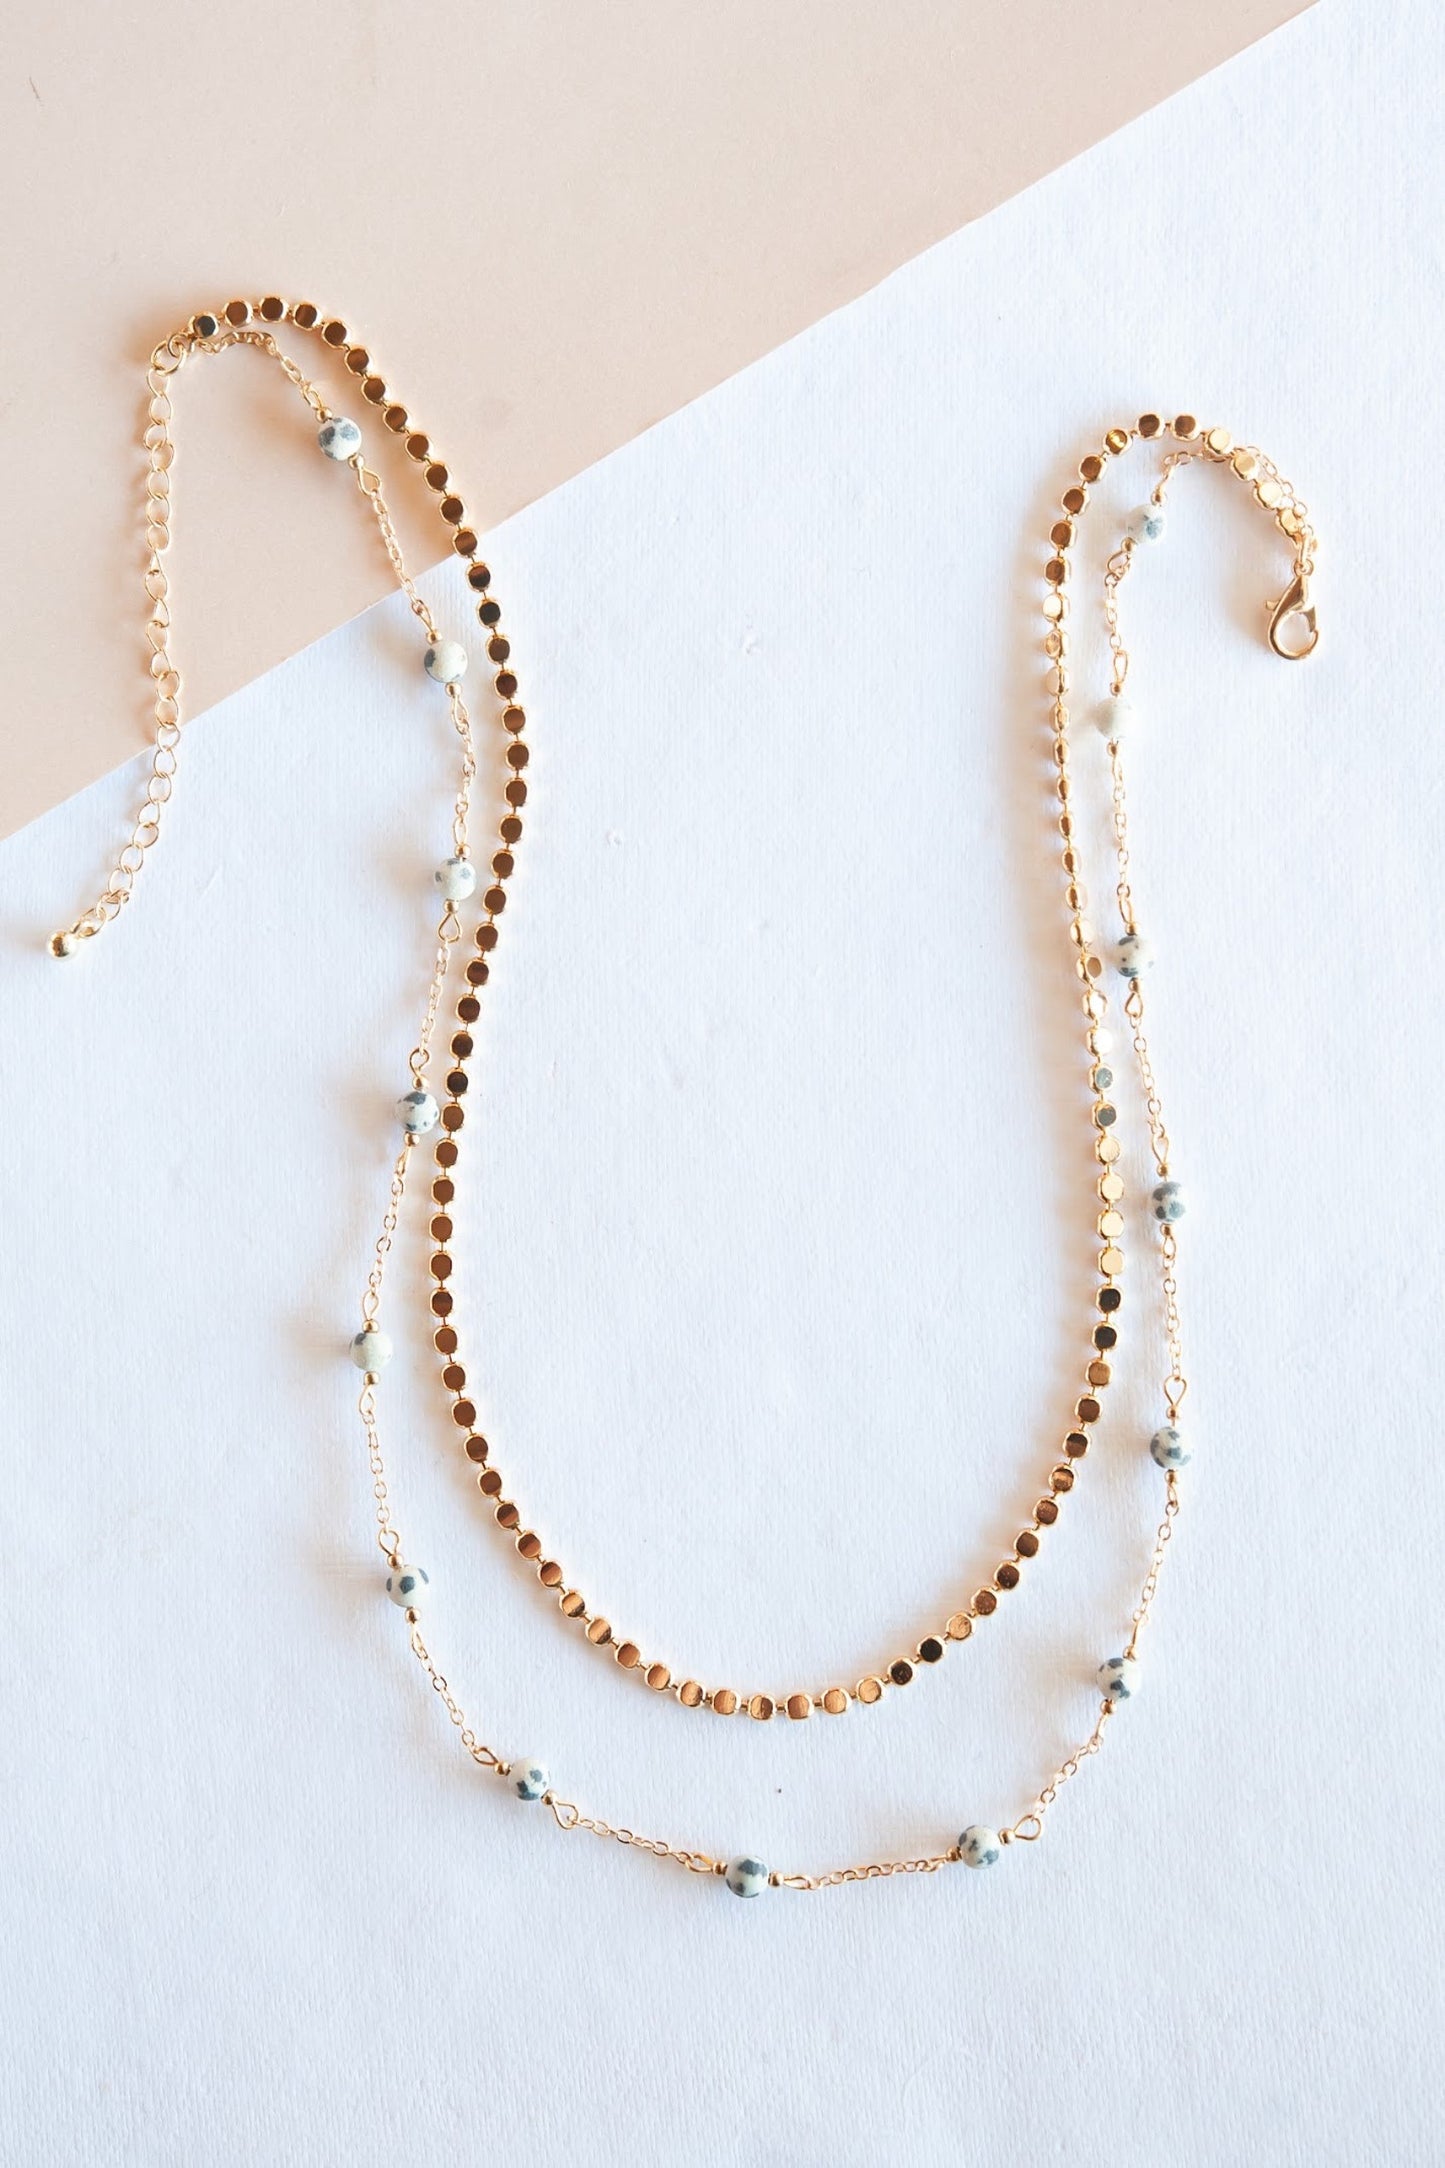 Blake Delicate Layering Necklace | Dainty Gold Chain and Stone Bead Necklace